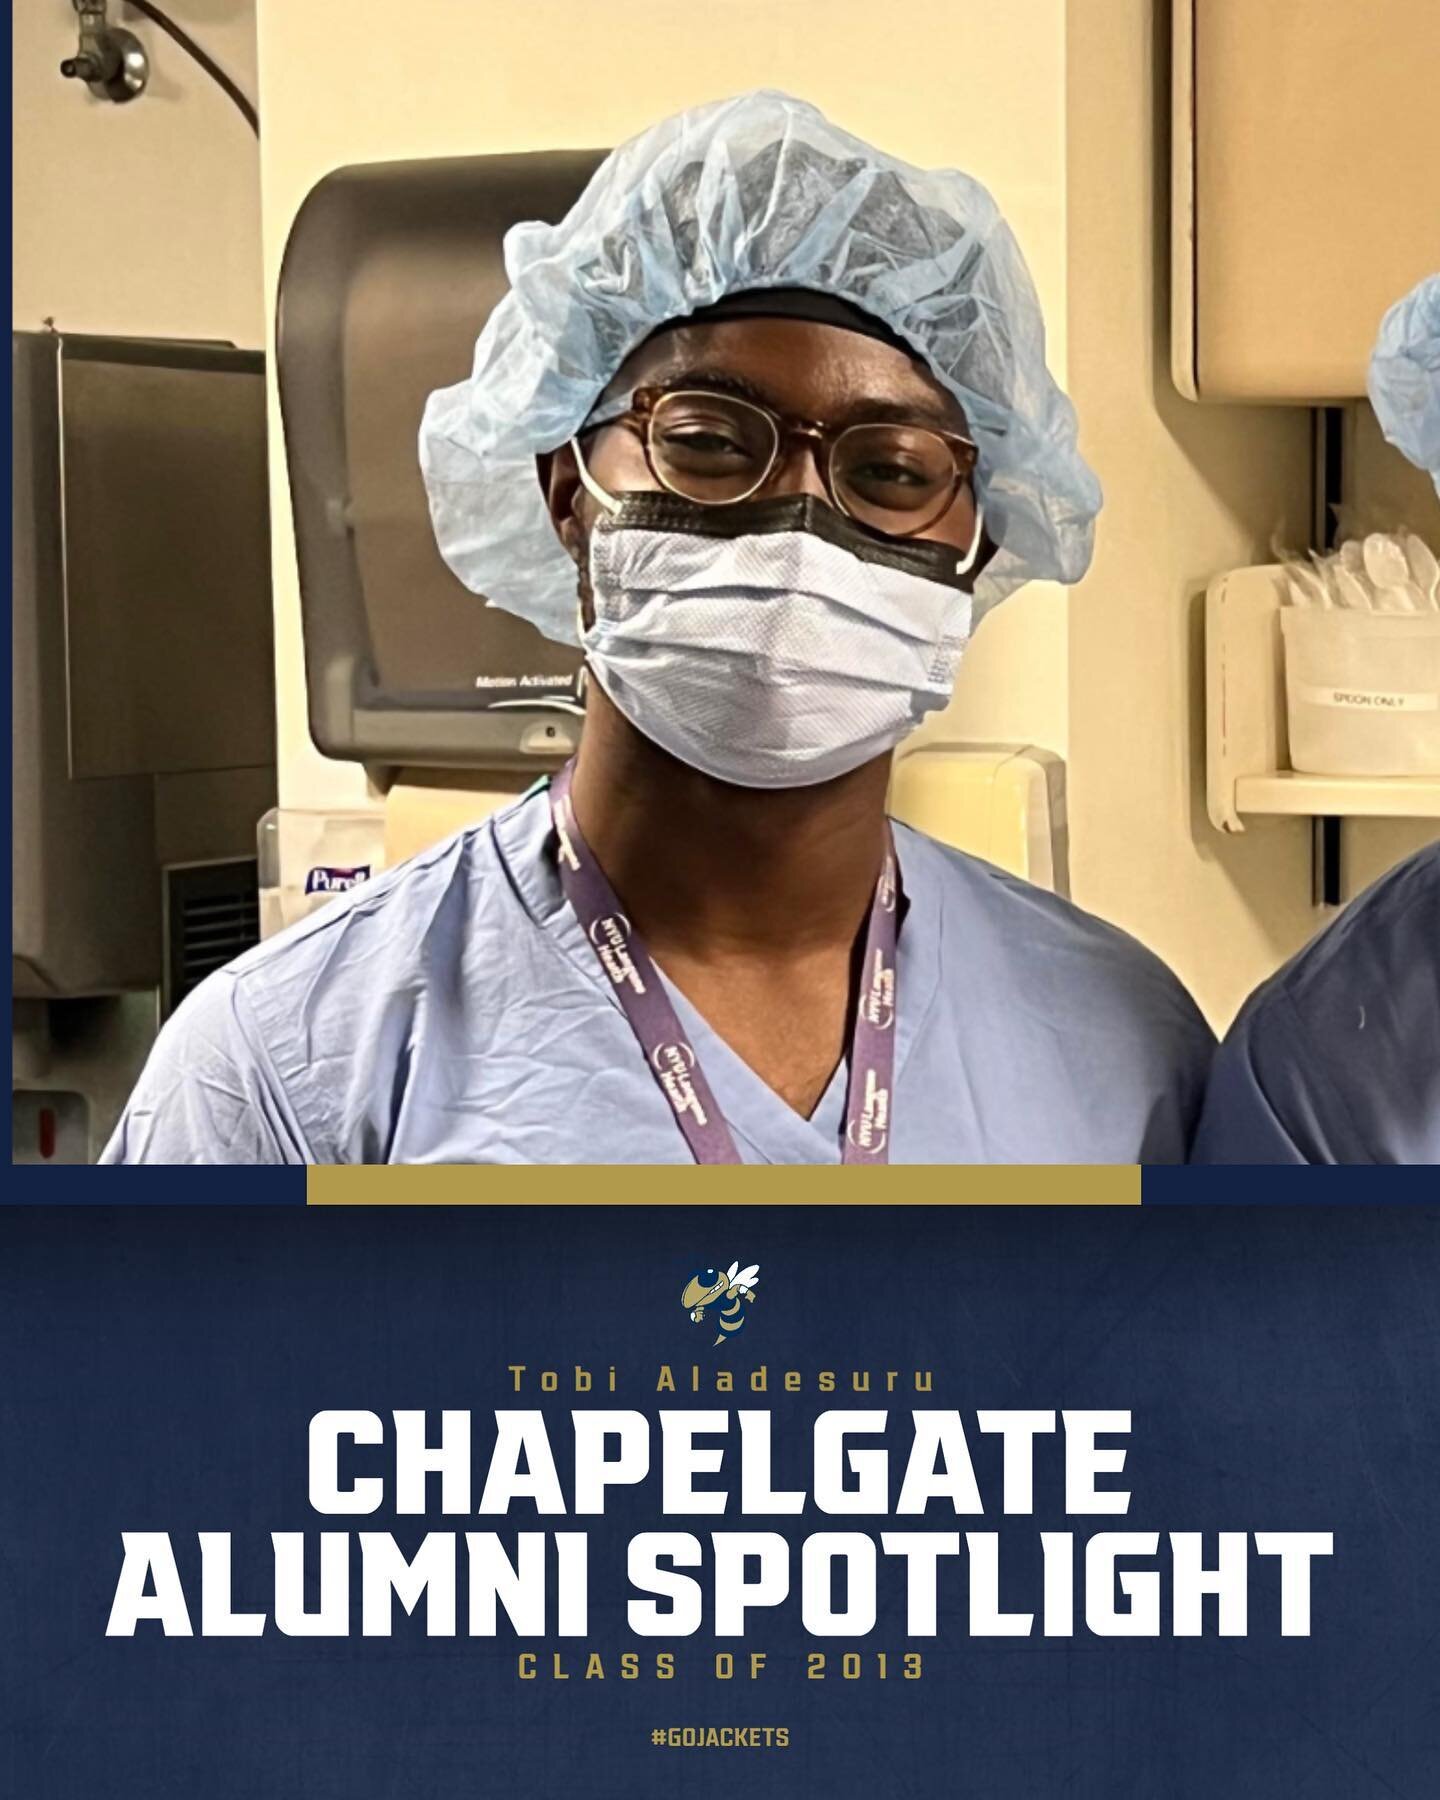 Tobi attended college at Princeton University and then attended medical school at Weill Cornell. He now lives in New York City where he is a surgical resident. His favorite memory from Chapelgate is spending time with Mr. Schuit and his friends on th